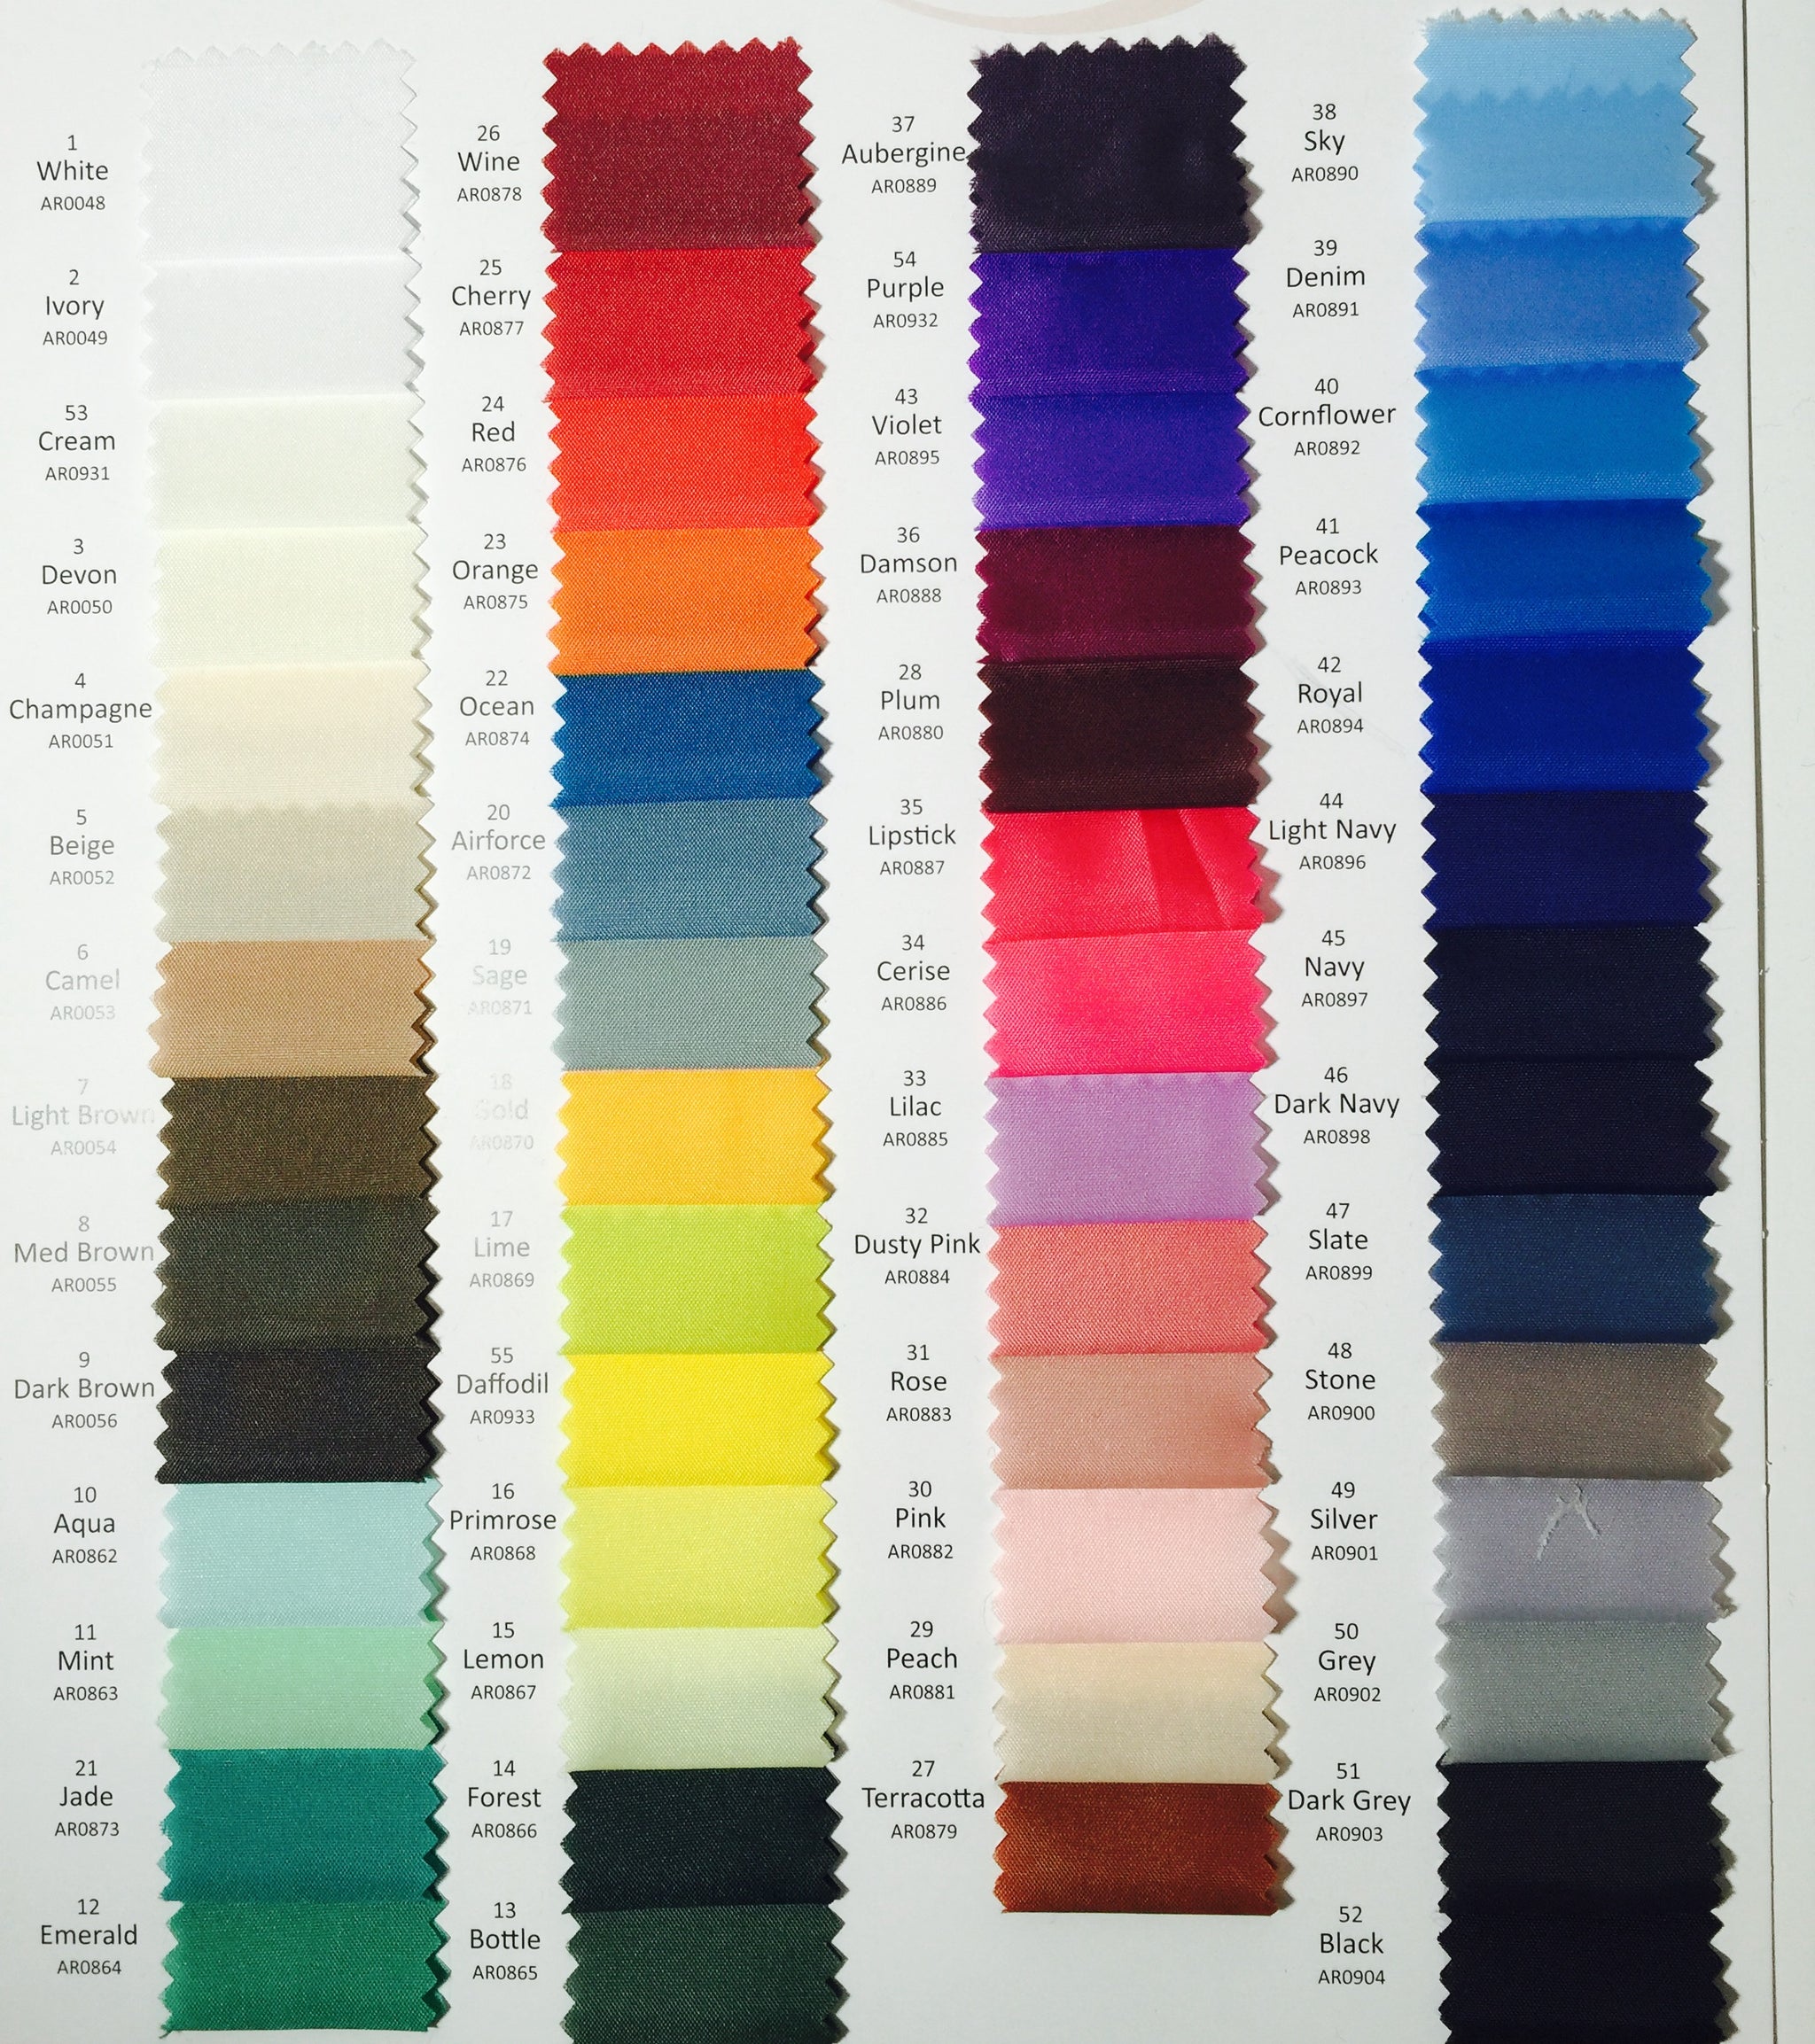 HIGH QUALITY ANTI STATIC DRESS LINING FABRIC 100% POLYESTER 158CM WIDE M450  SOLD PER METRE MTEX